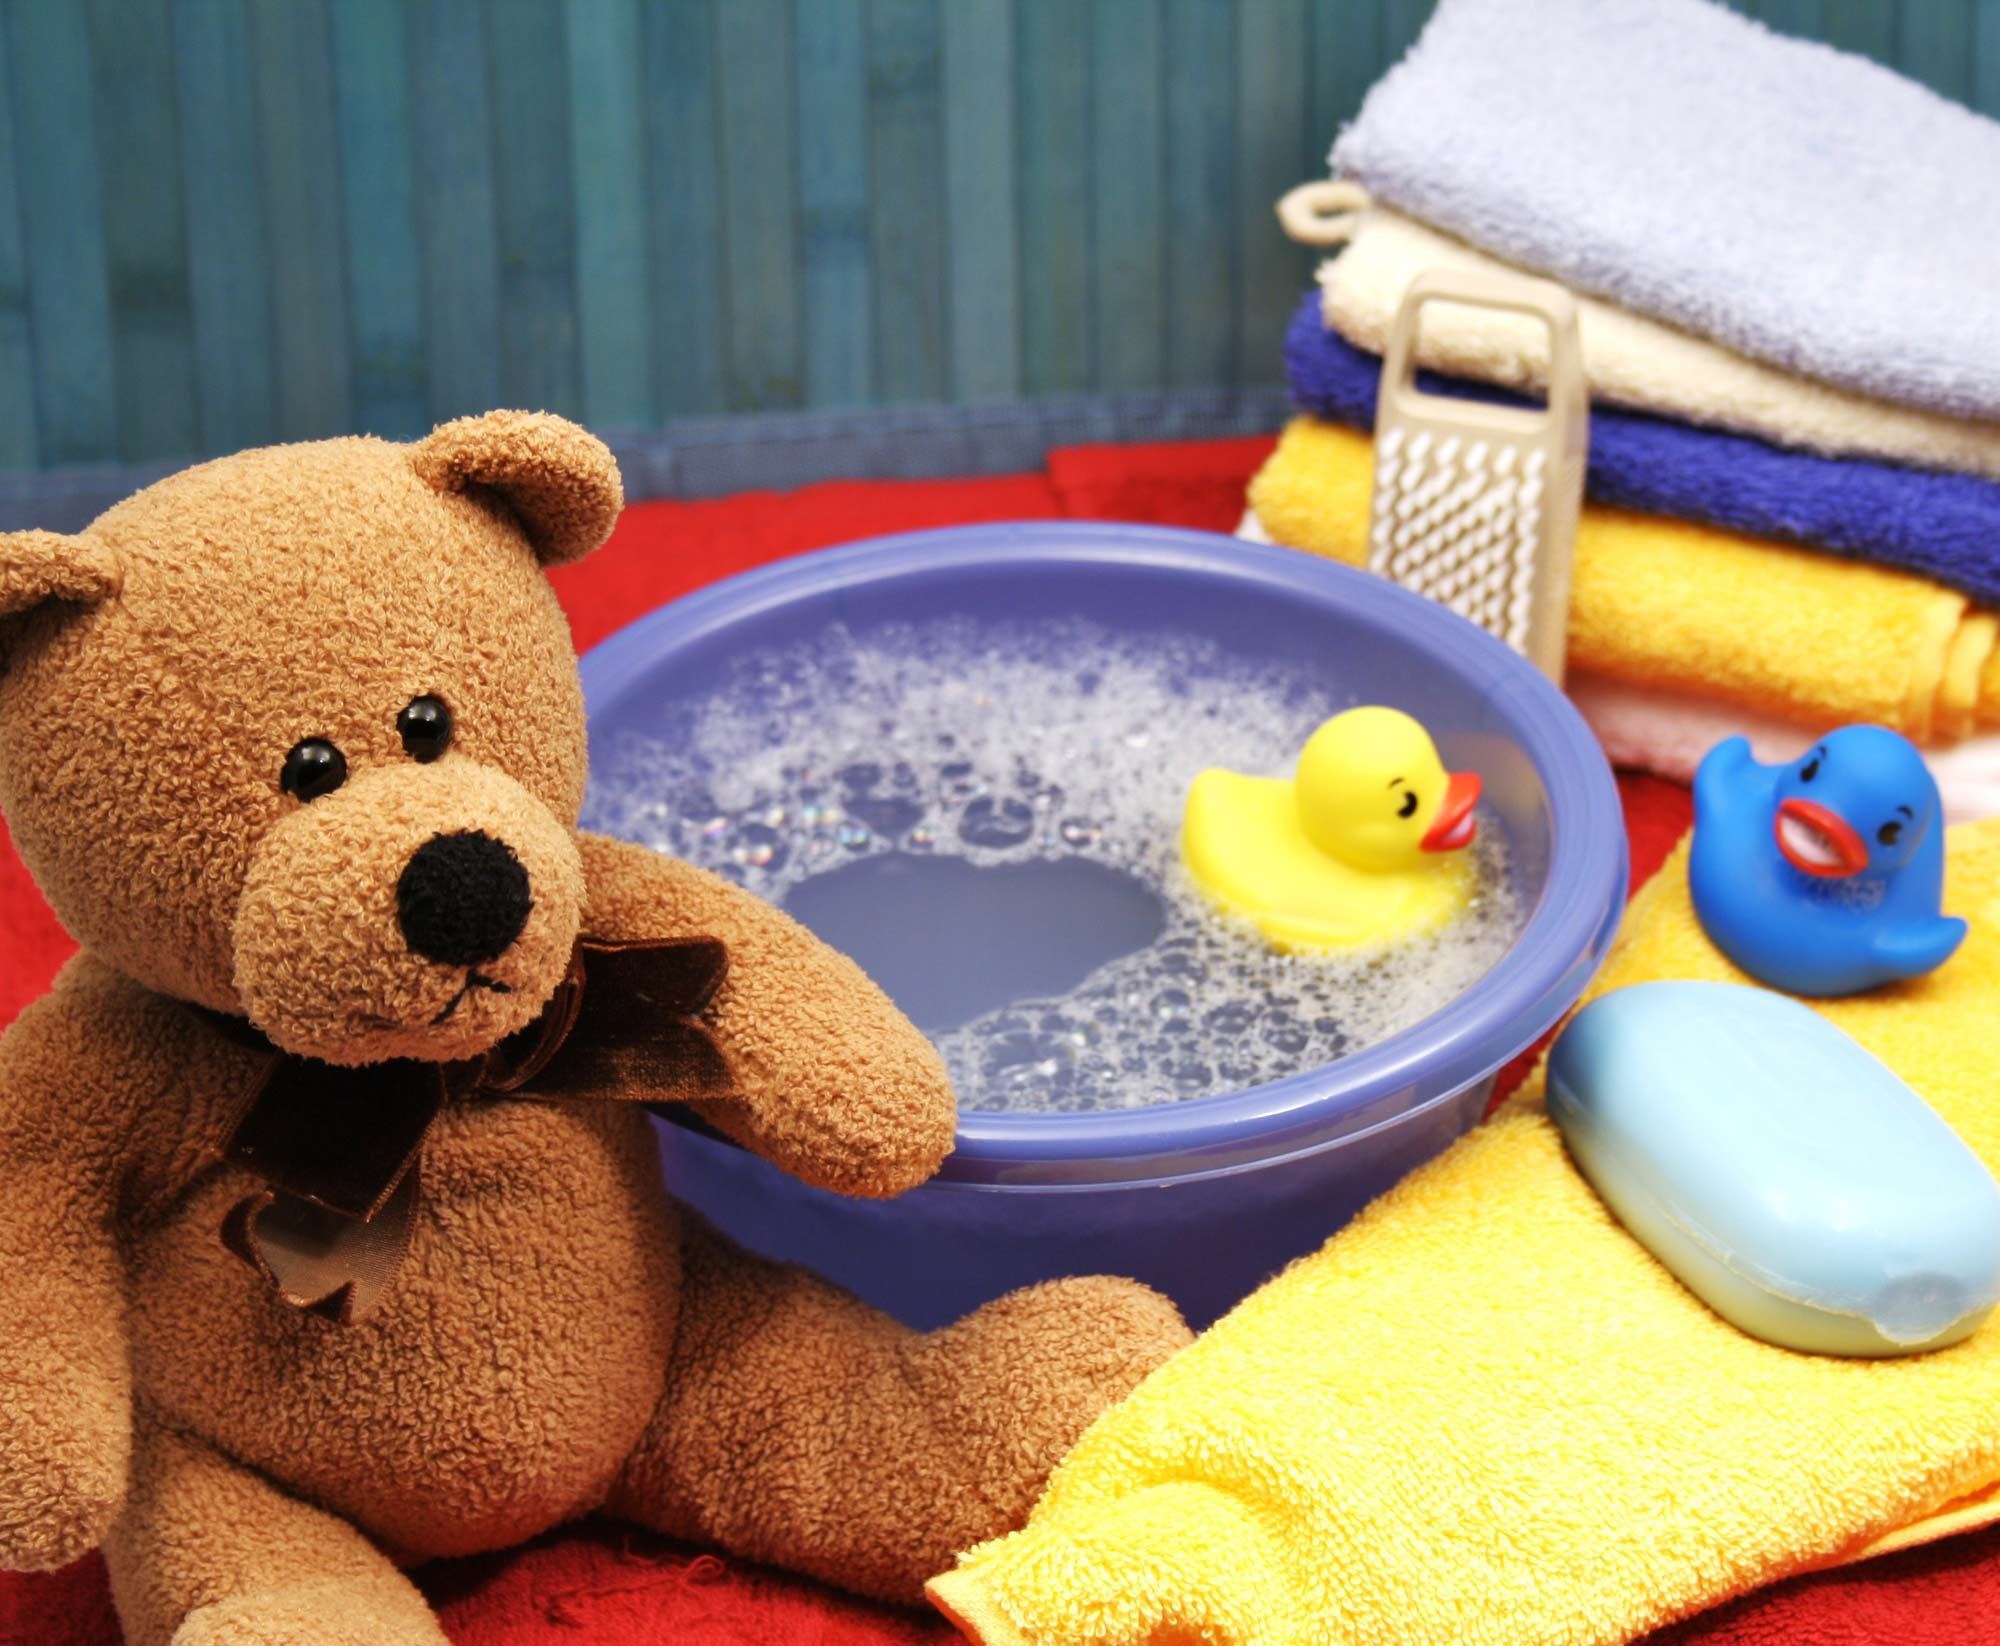 The Complete Guide to Finding Non-Toxic Bath Toys for Toddlers